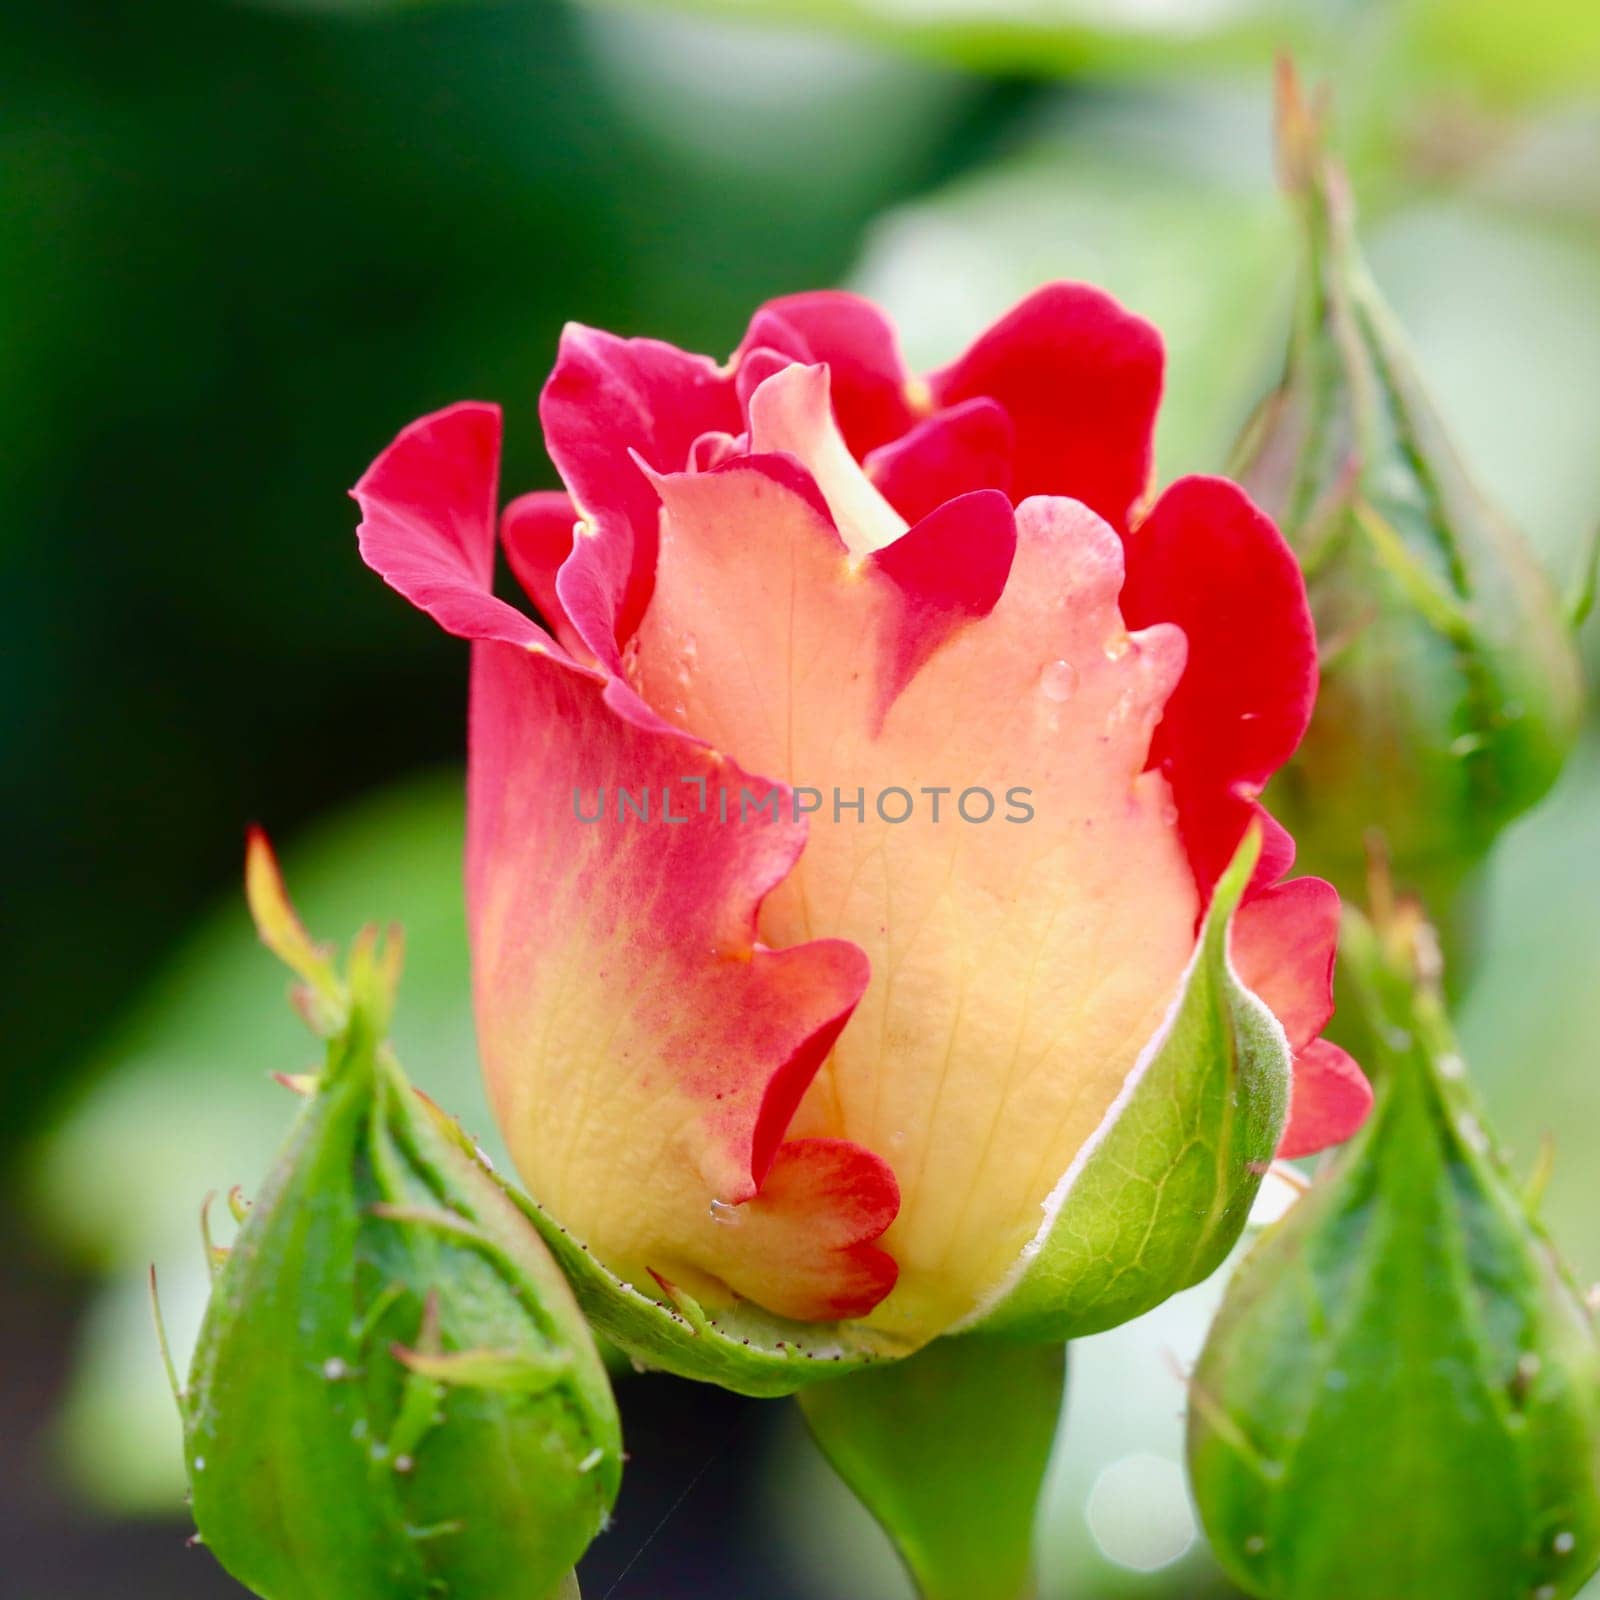 Beautiful red yellow rose with dew drops in the garden. Ideal for a greeting cards